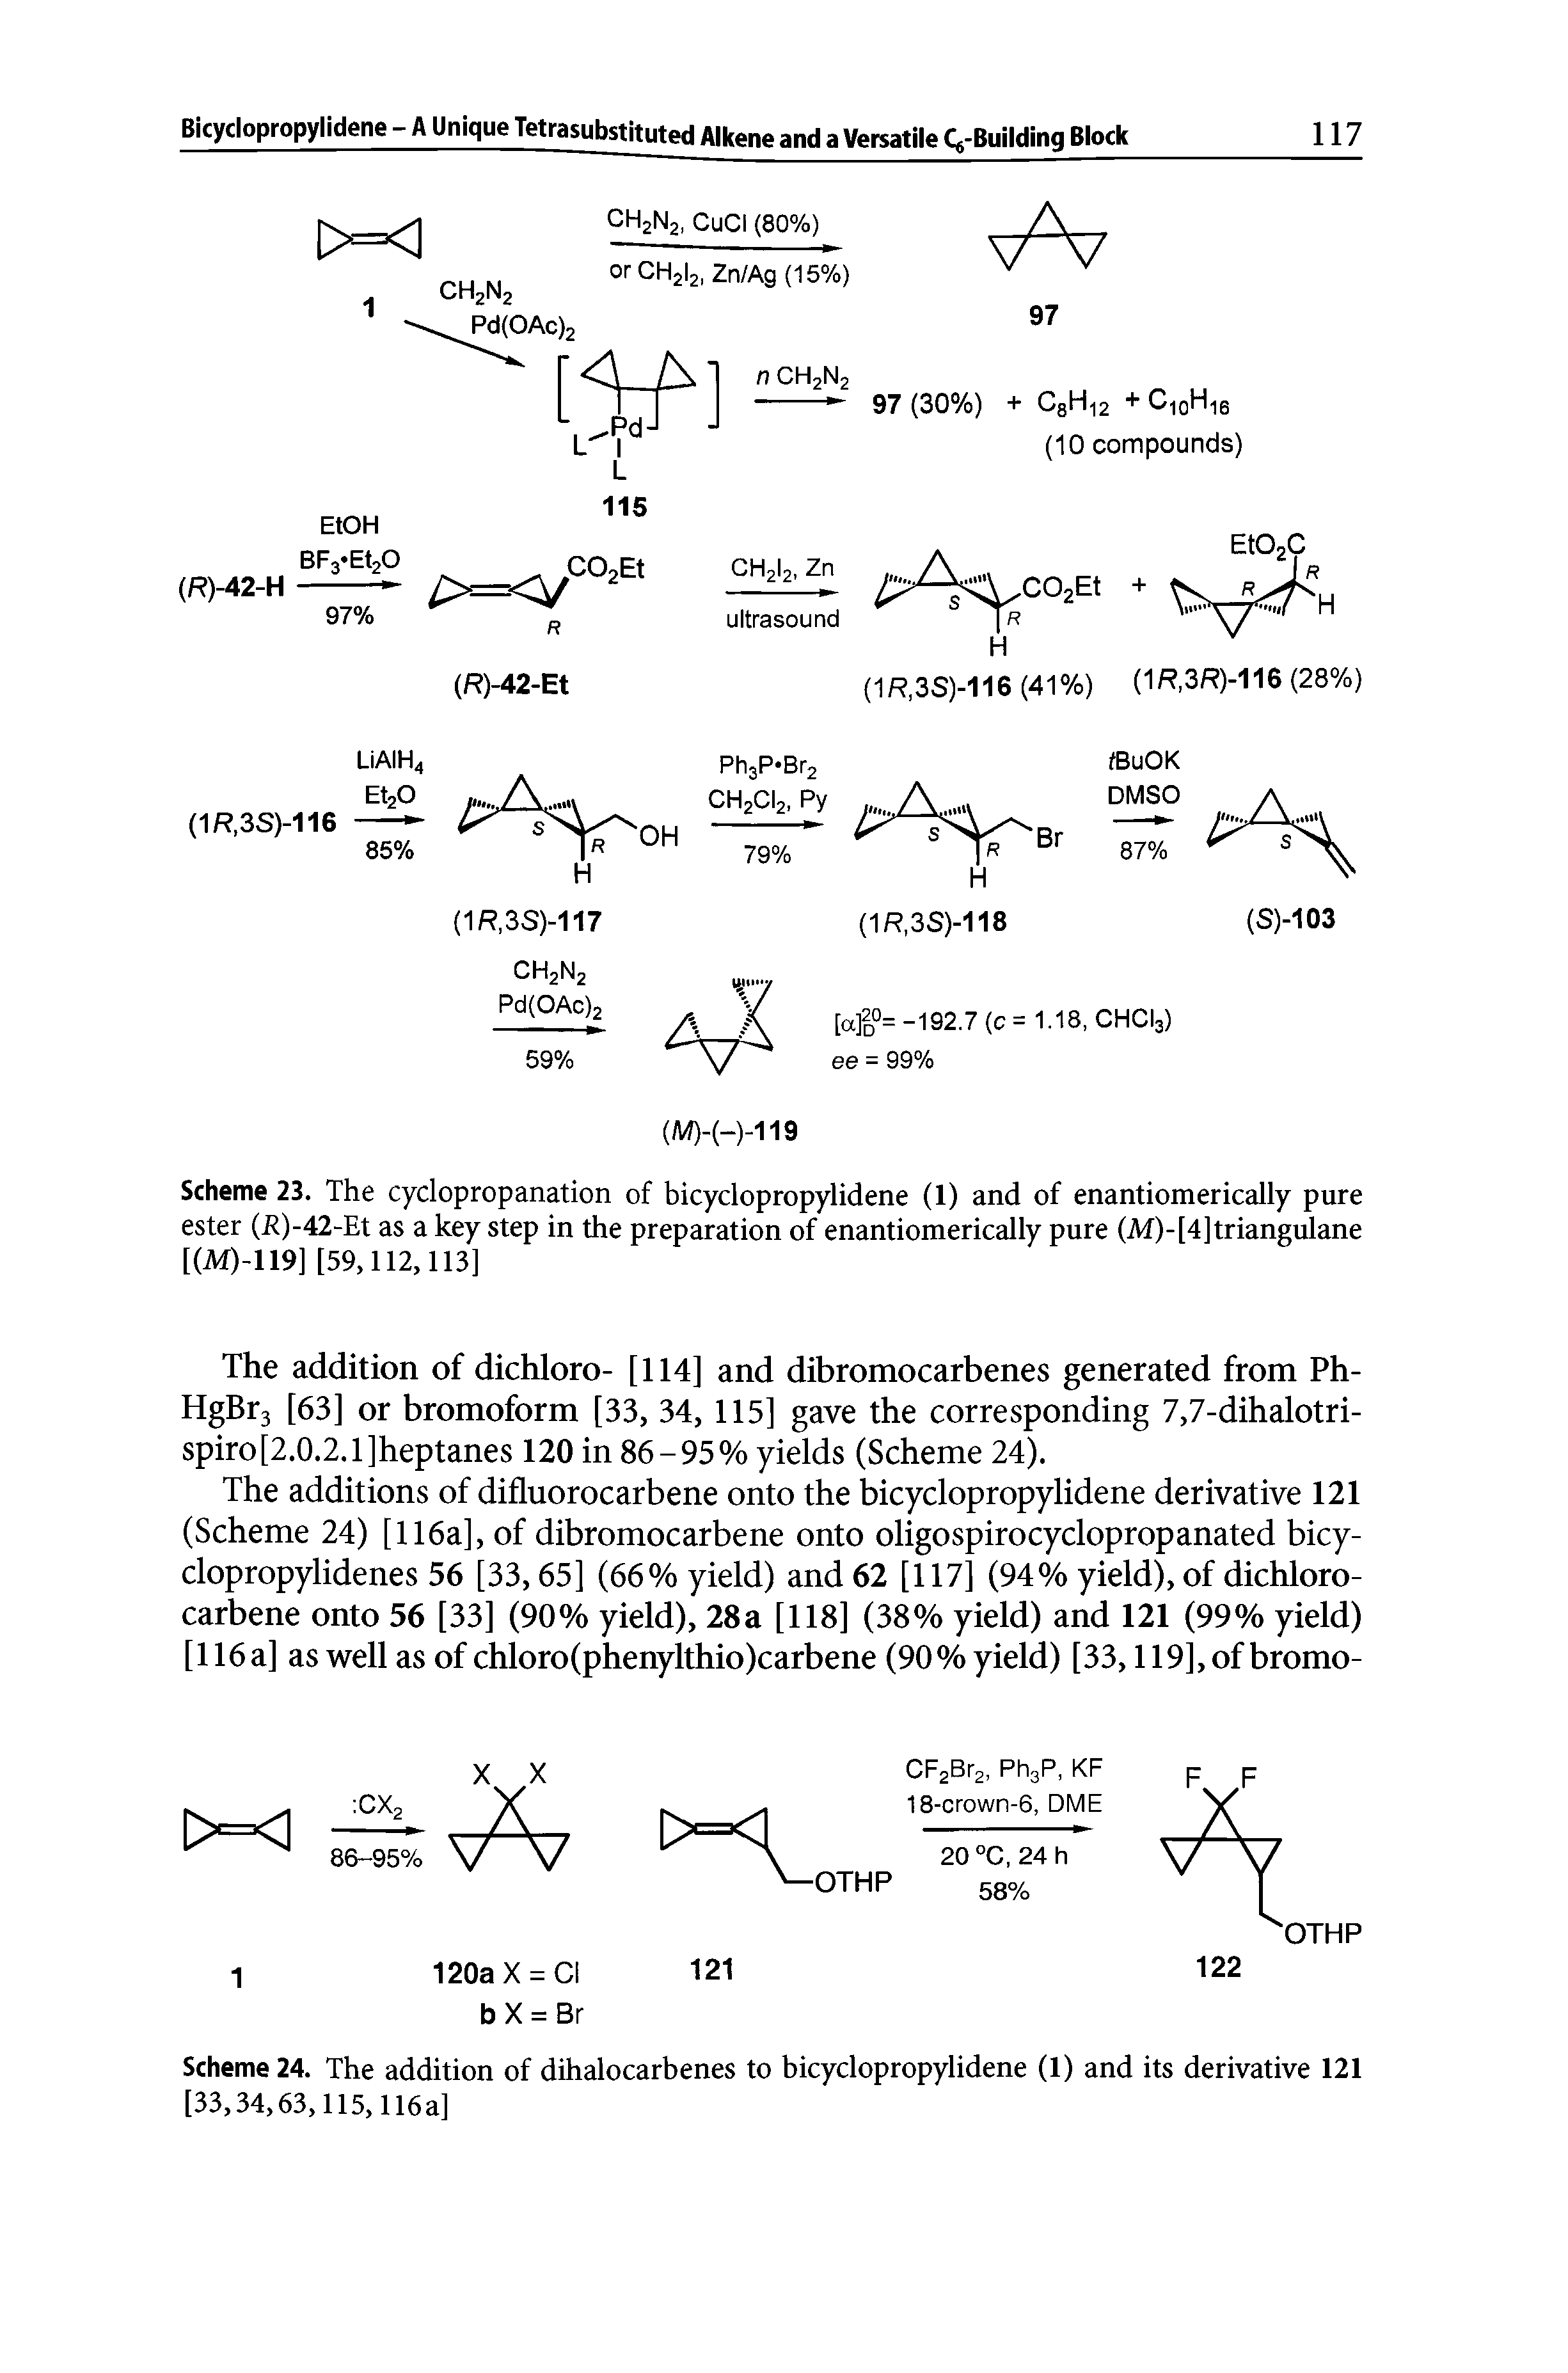 Scheme 23. The cyclopropanation of bicyclopropylidene (1) and of enantiomerically pure ester (i )-42-Et as a key step in the preparation of enantiomerically pure (M)-[4]triangulane [(M)-119] [59,112,113]...